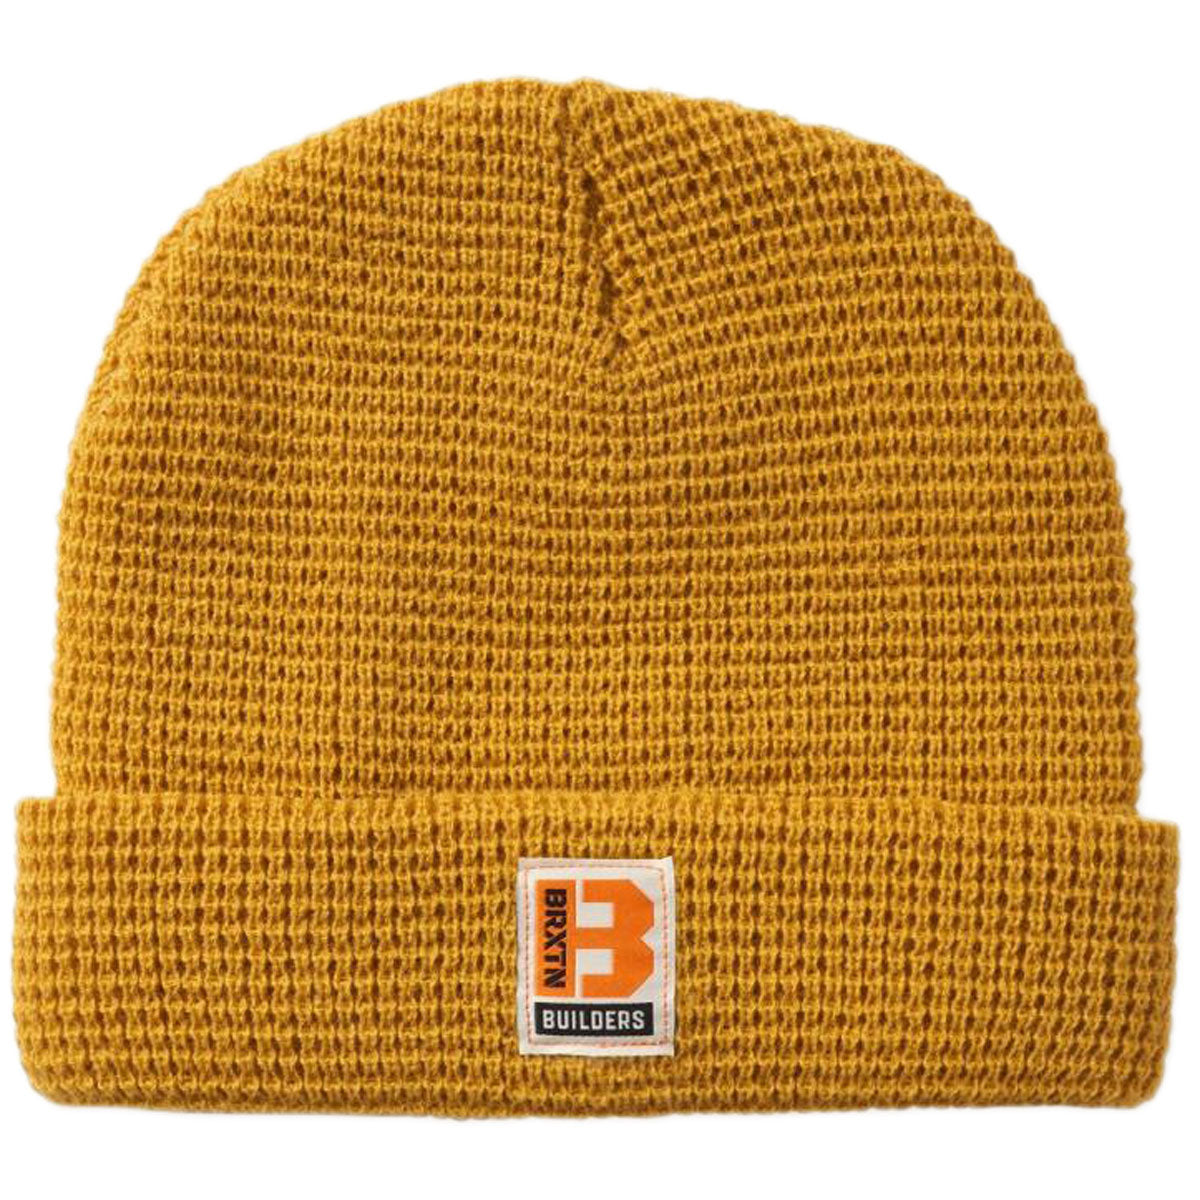 Brixton Builders Waffle Knit Beanie - Bright Gold image 1